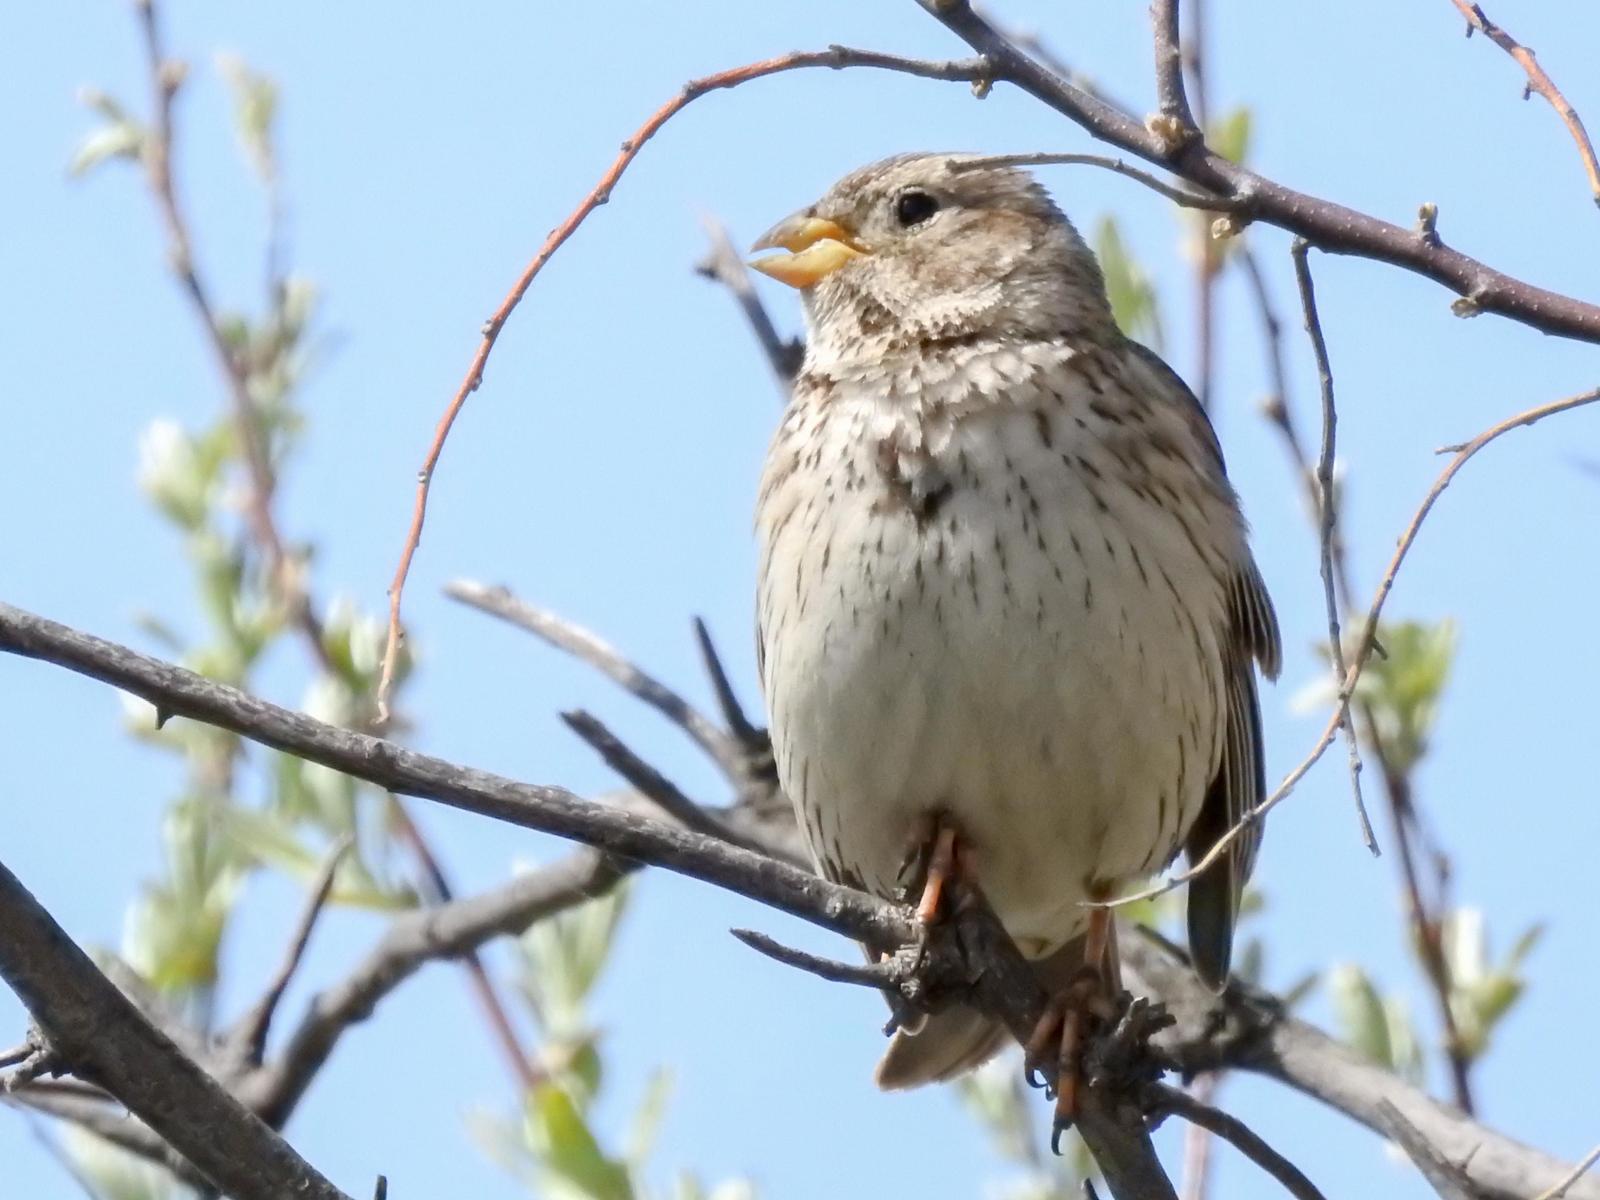 Corn Bunting Photo by African Googre